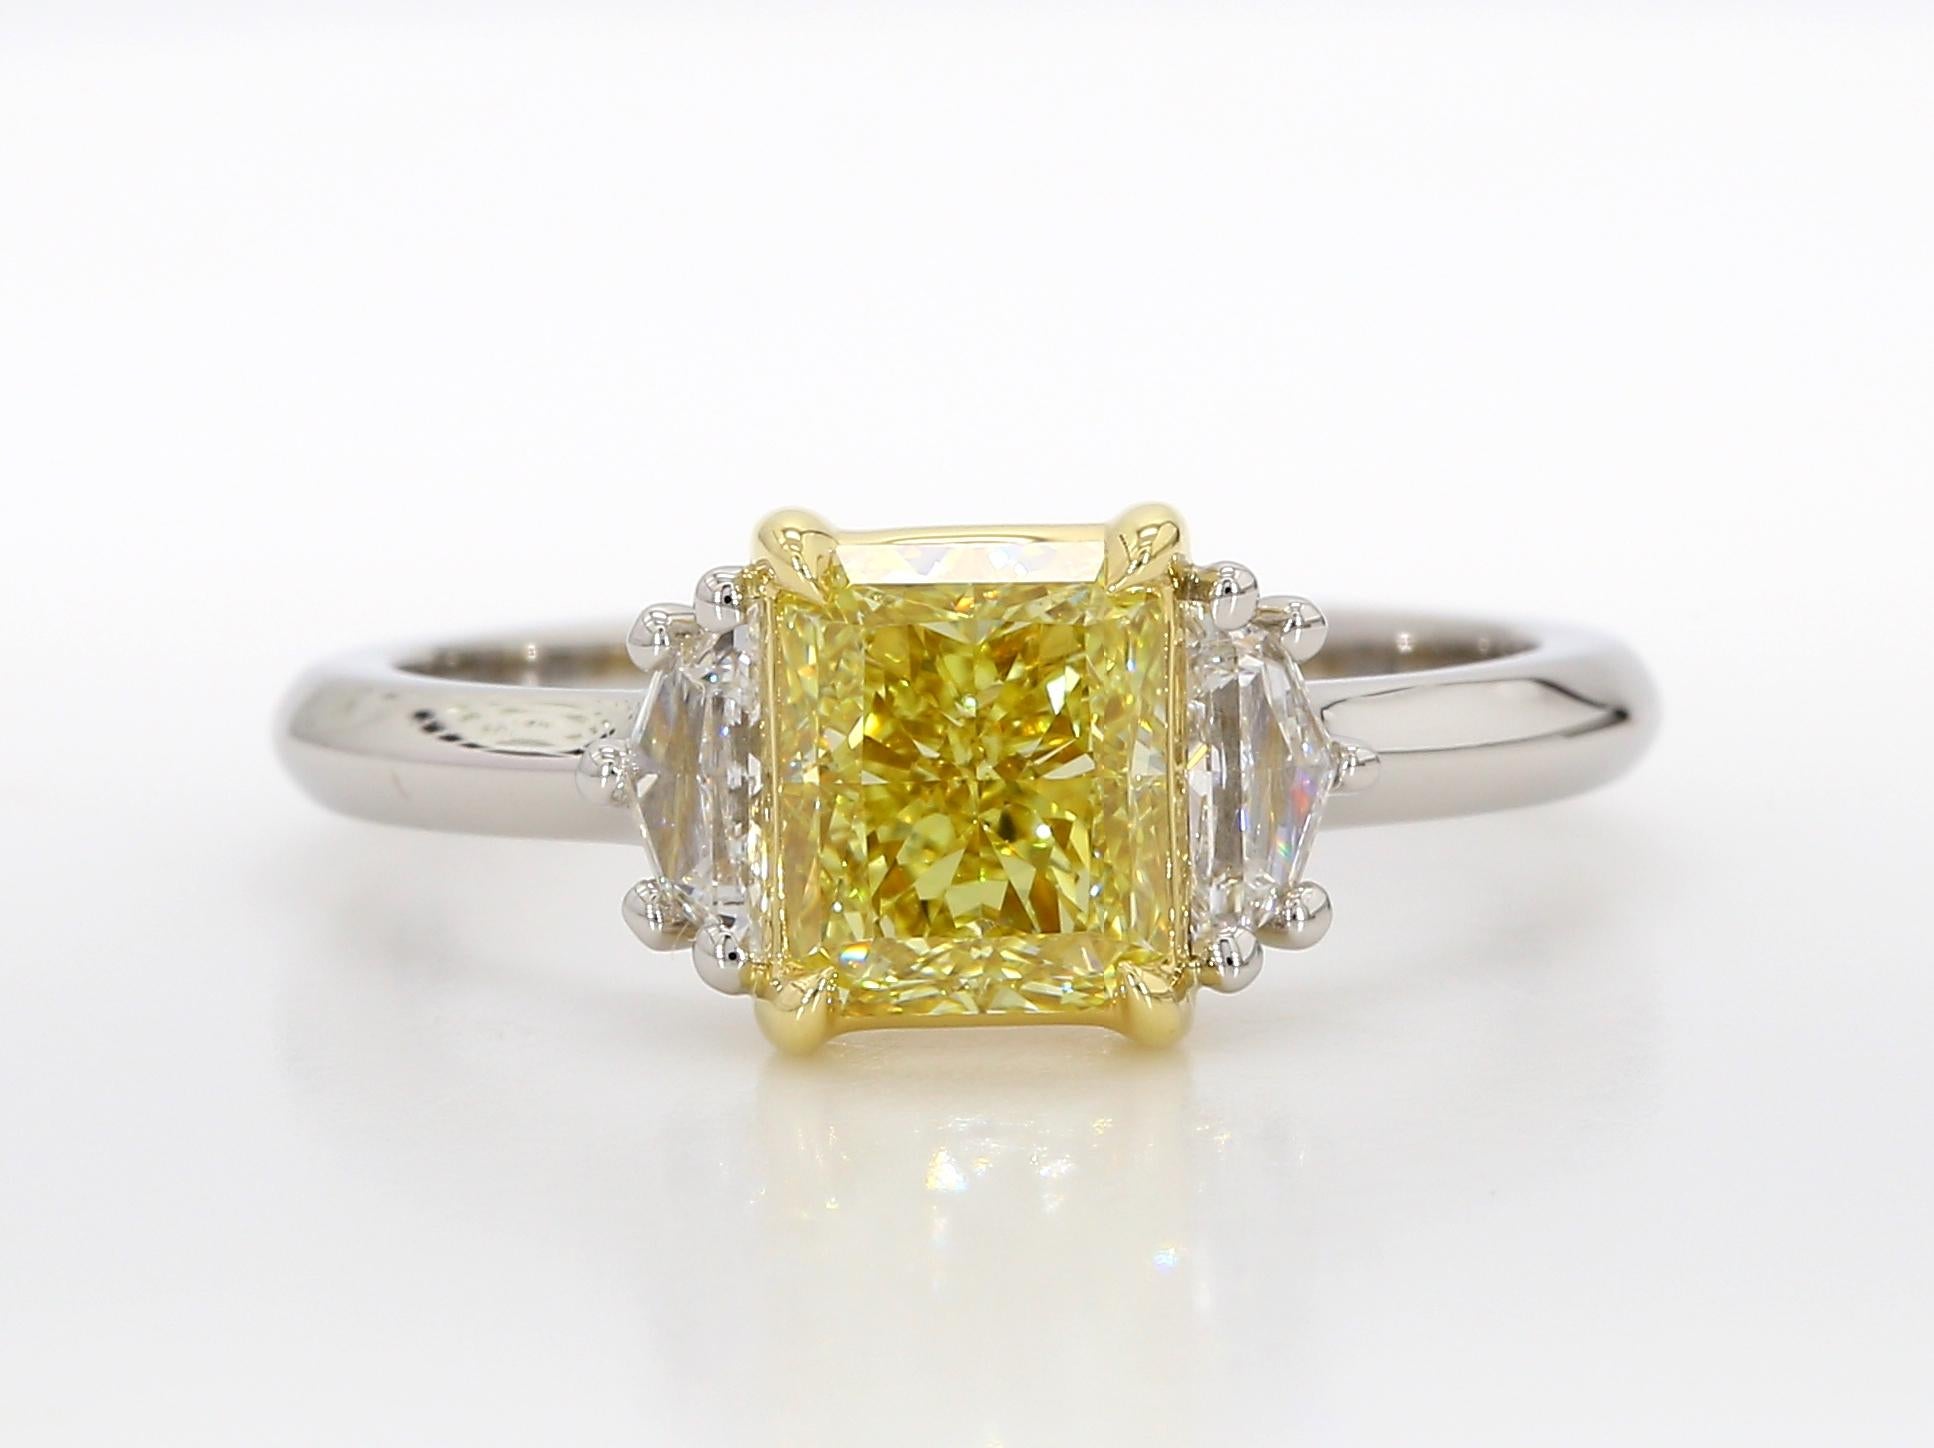 A stunning Three-Stone Engagement Ring features a 1.42-carat Fancy Intense Yellow Radiant-cut diamond. This diamond has been certified by GIA as Internally Flawless, highlighting its exceptional clarity. The center diamond is gracefully complemented